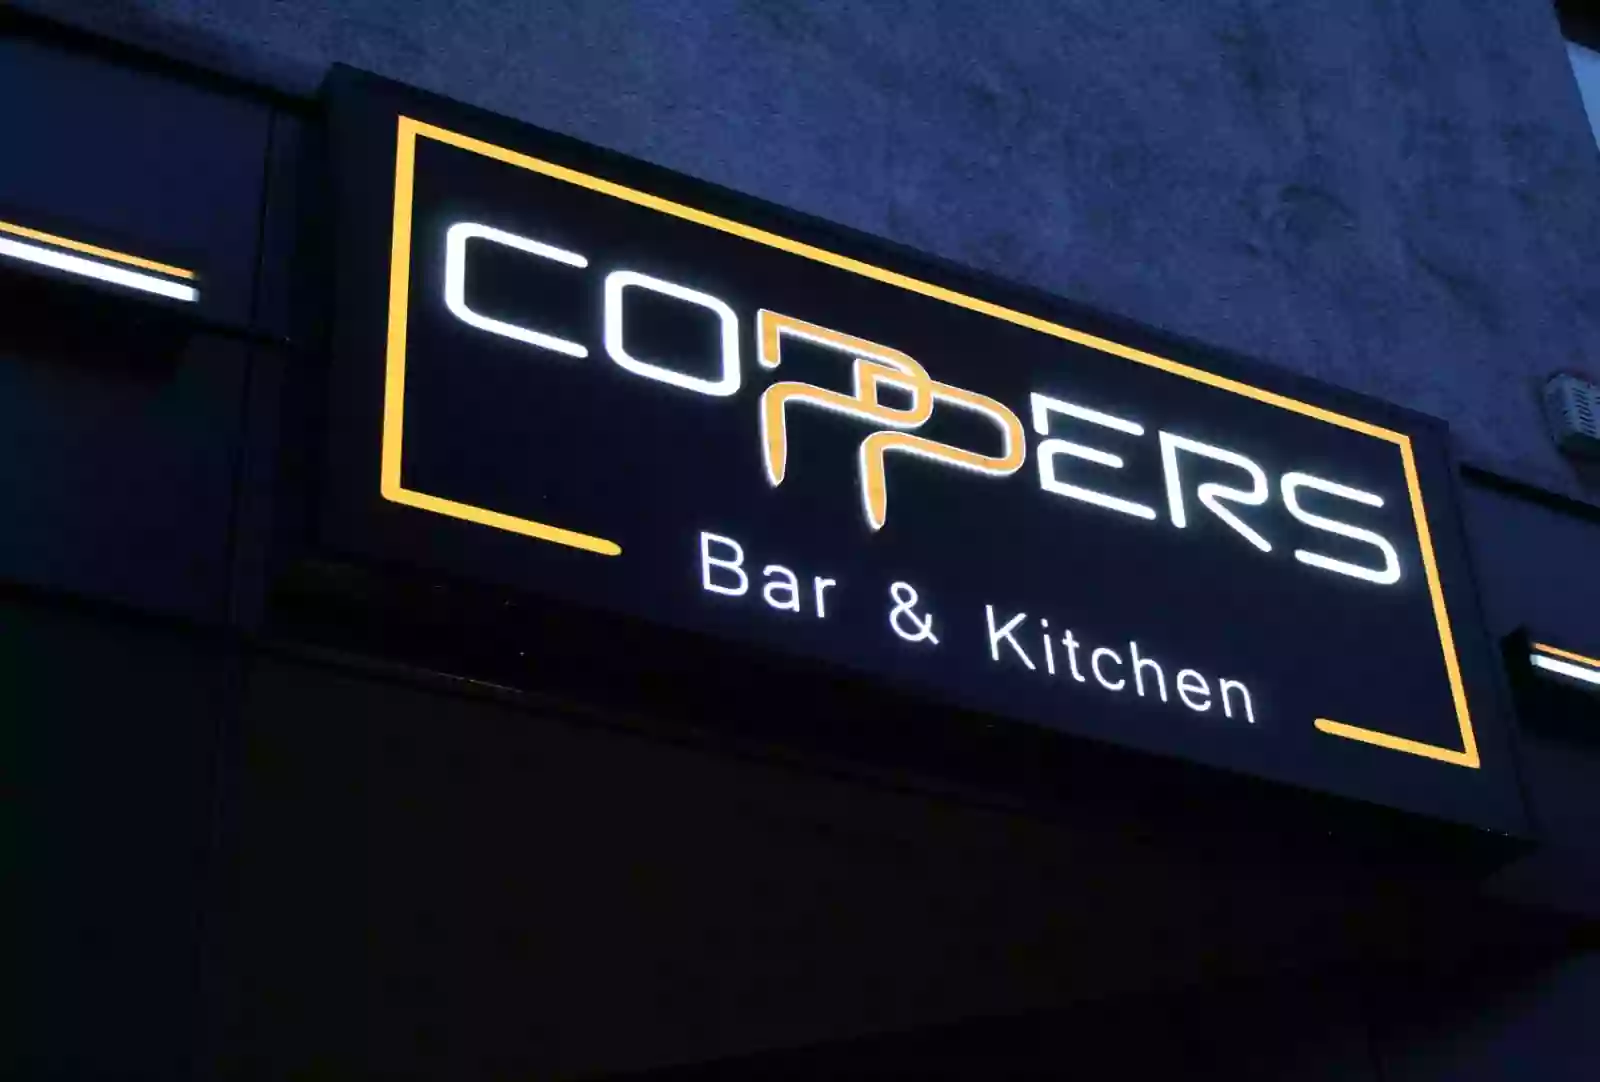 Coppers Bar & Kitchen